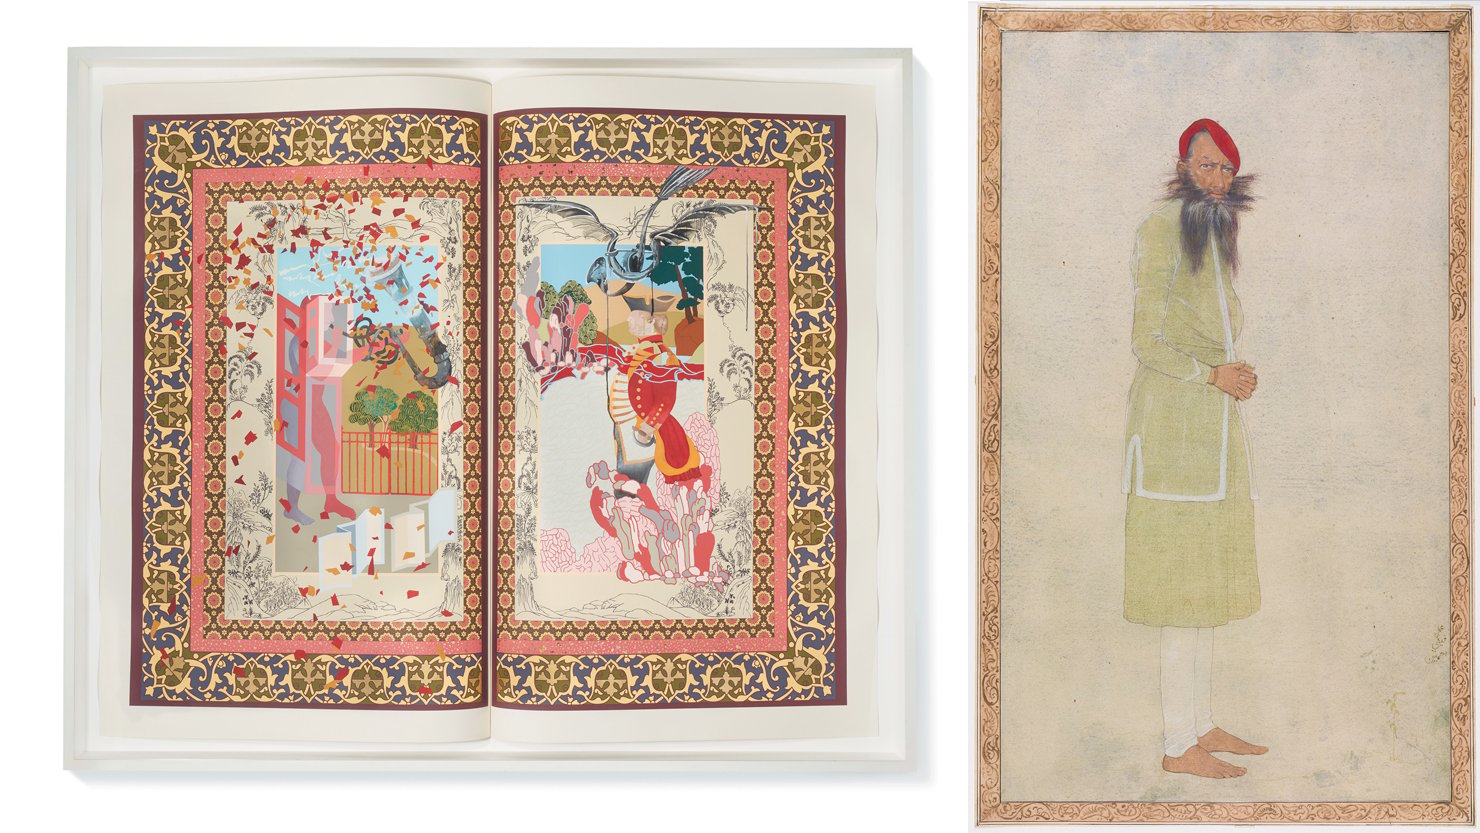 L: The Explosion of the Company Man by Shahzia Sikander, 2011. Private Collection | R: A Rajput Sirdar by Samuel Fyzee-Rahamin, c.1914-1915 © Tate